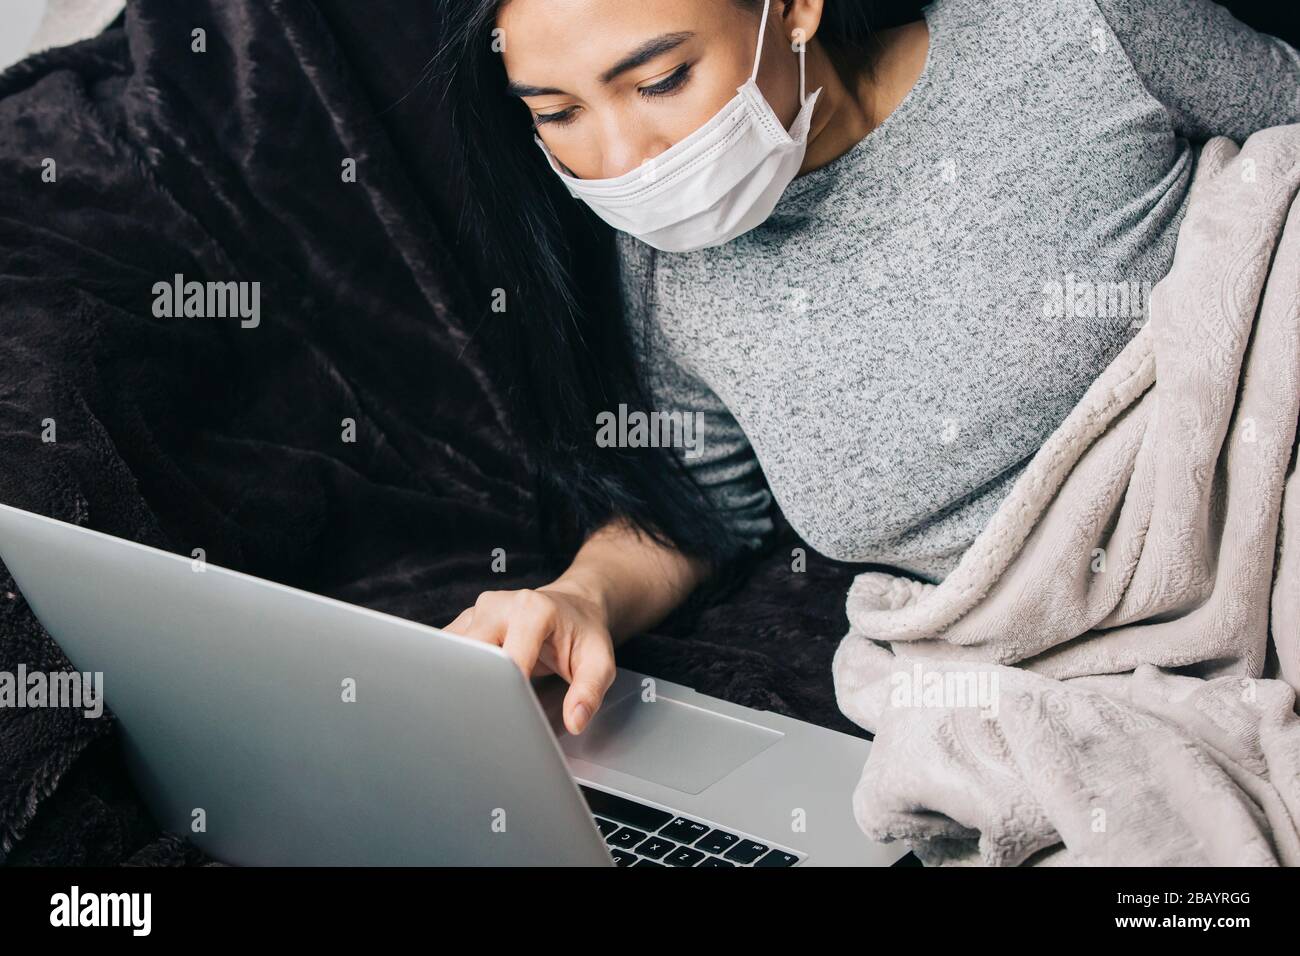 Coronavirus outbreak. Woman in despair watching number of cases and death toll of coronavirus  Covid-19 pandemic. Stock Photo